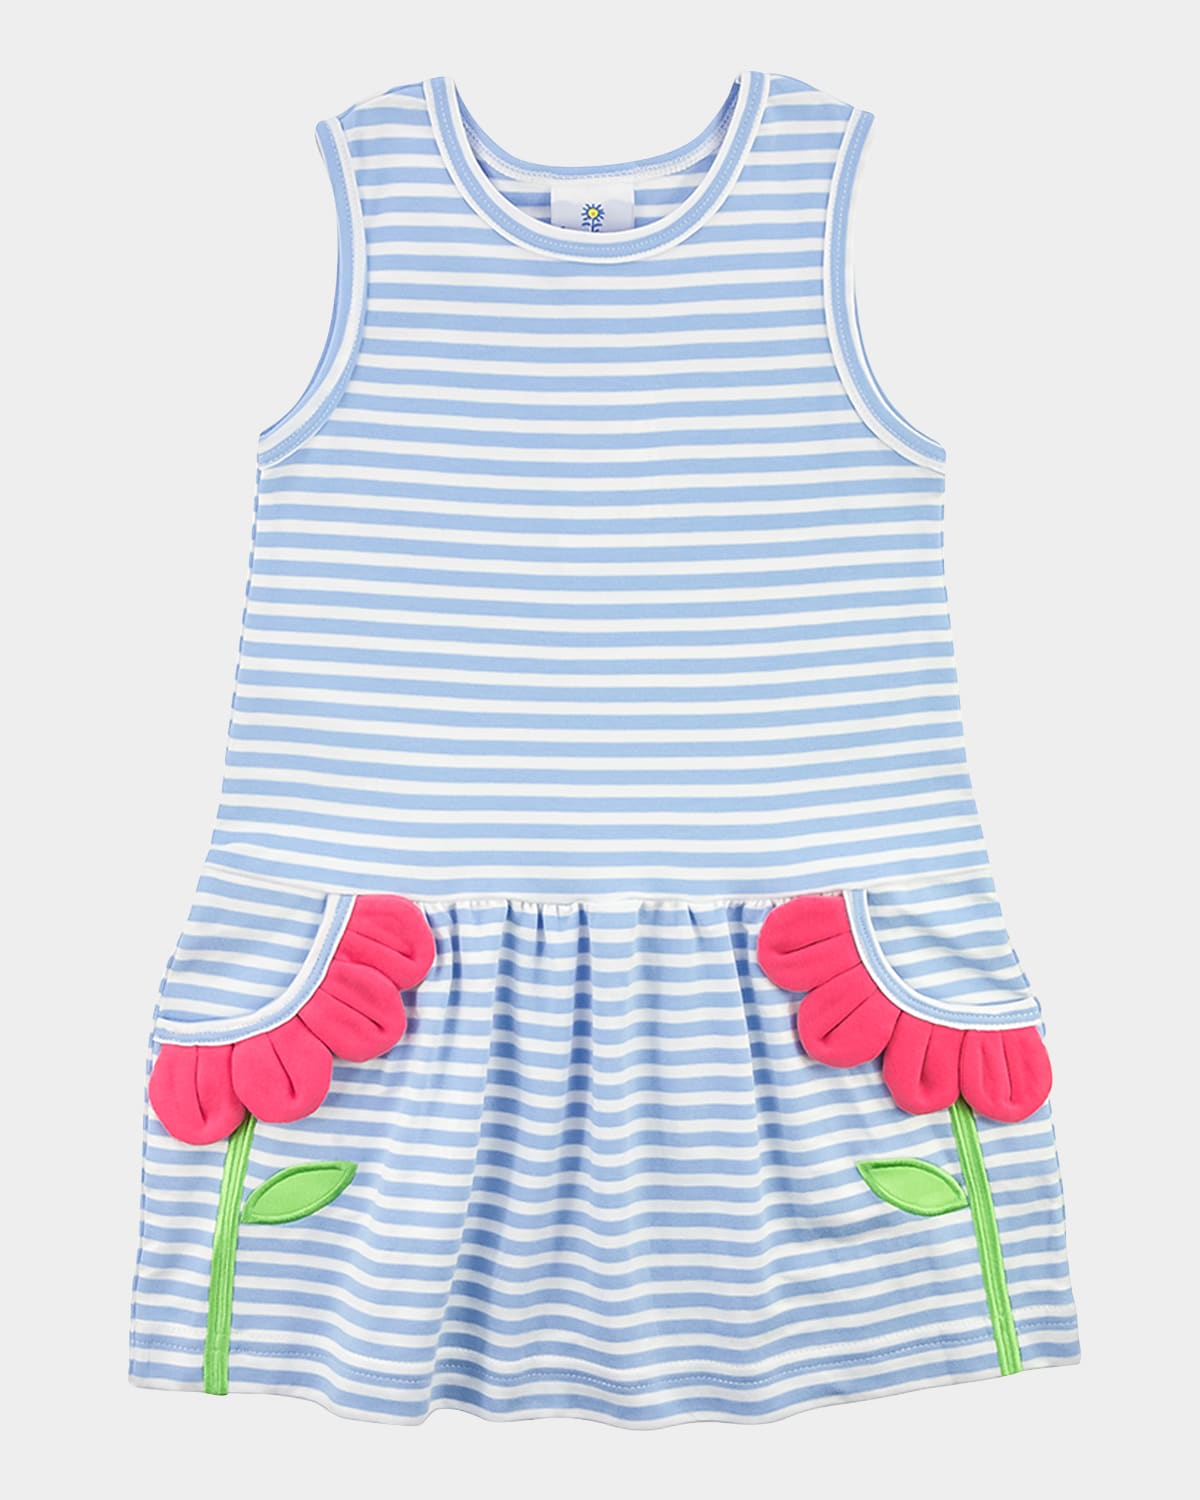 Florence Eiseman Kids' Girl's Striped Knit Dress With Flower Petal Pockets In Blue/white